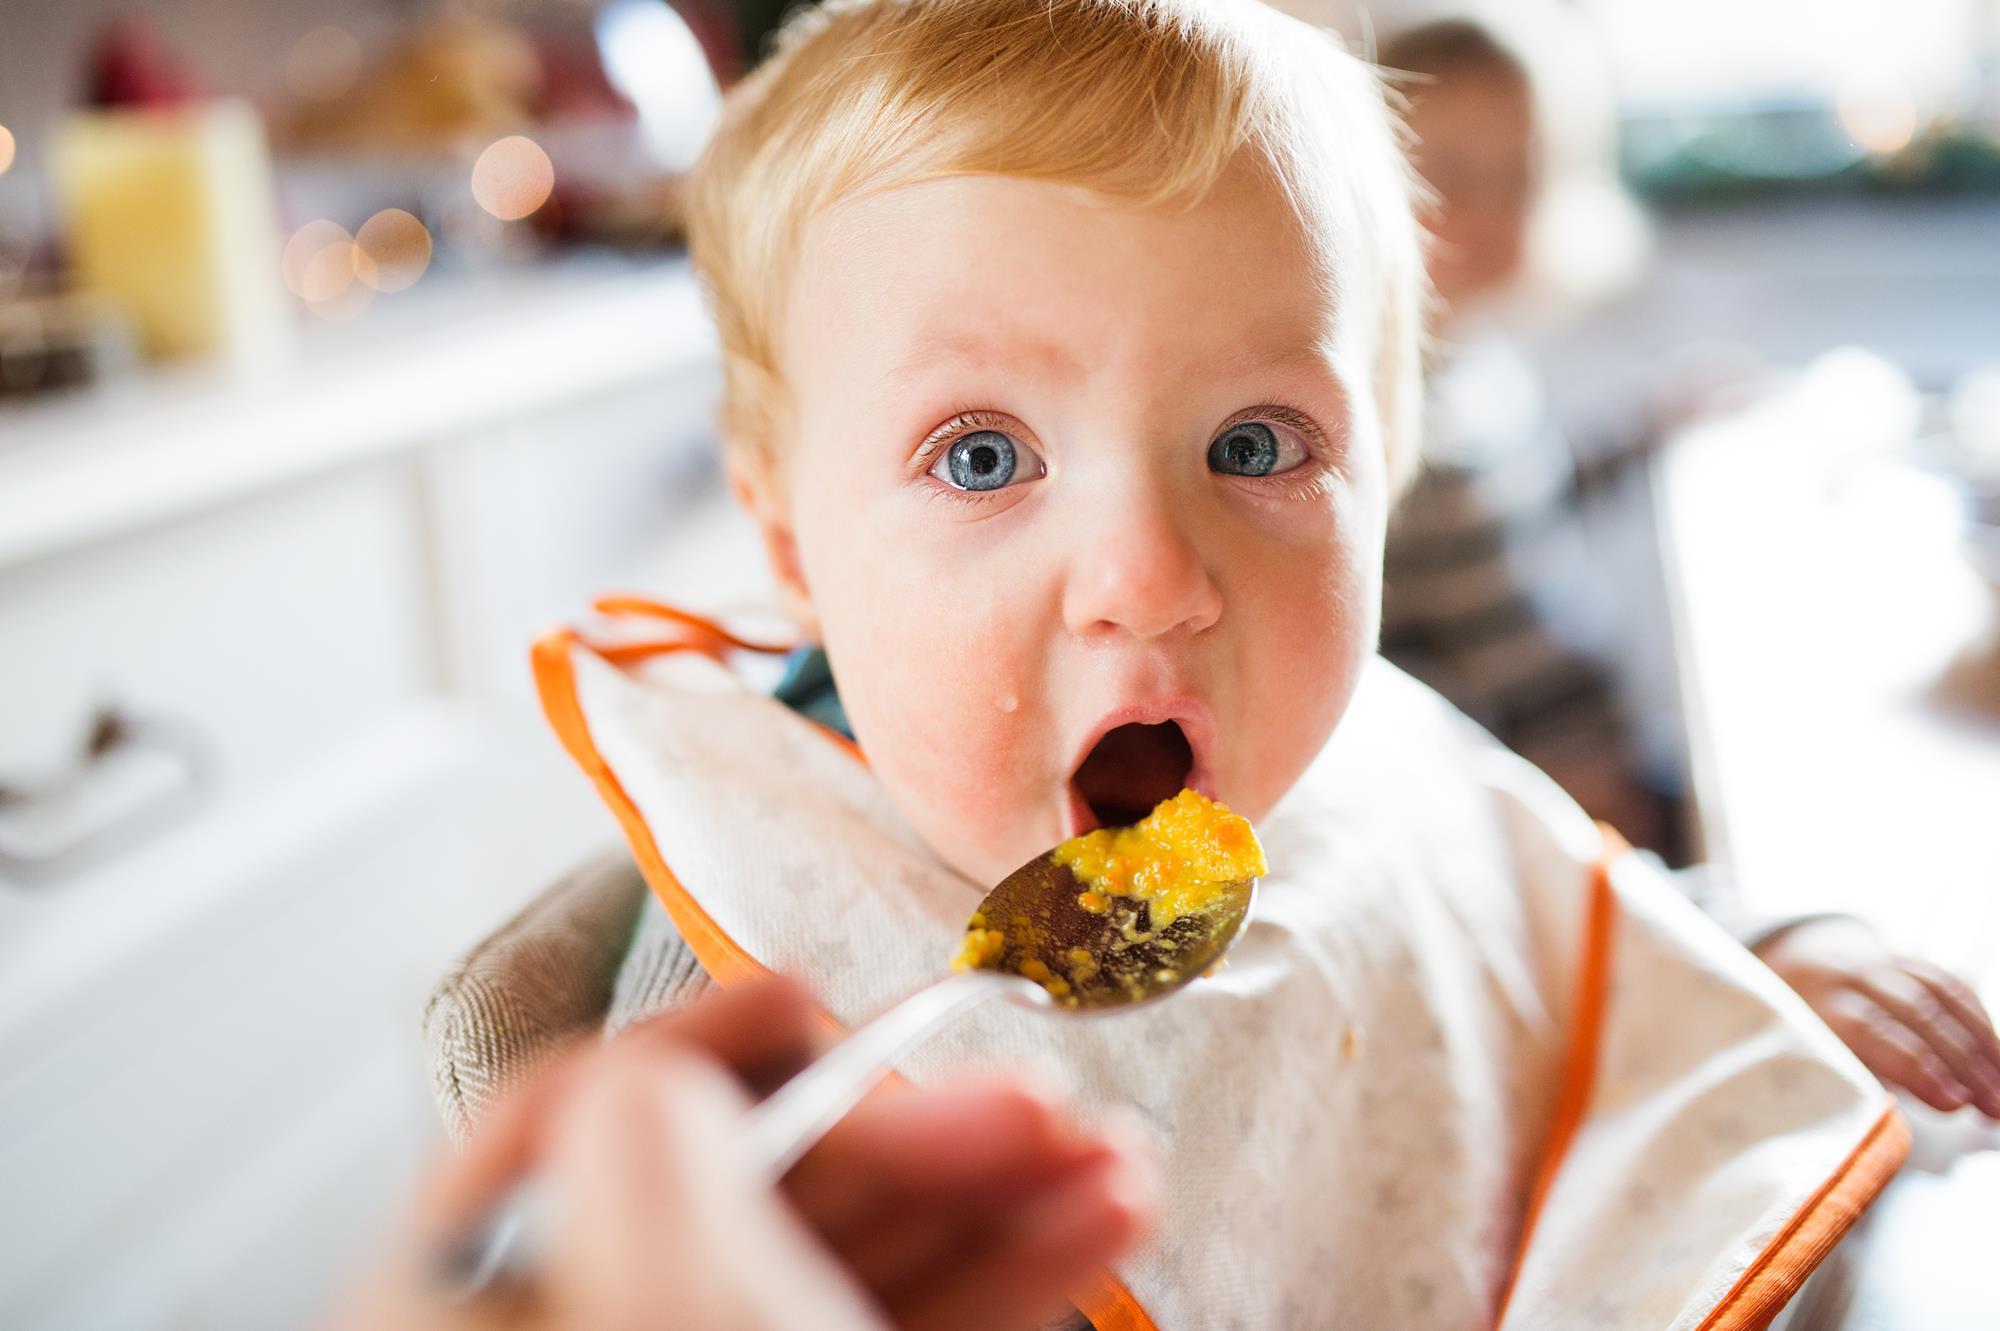 Baby food trends see big brands struggle in discounters' wake